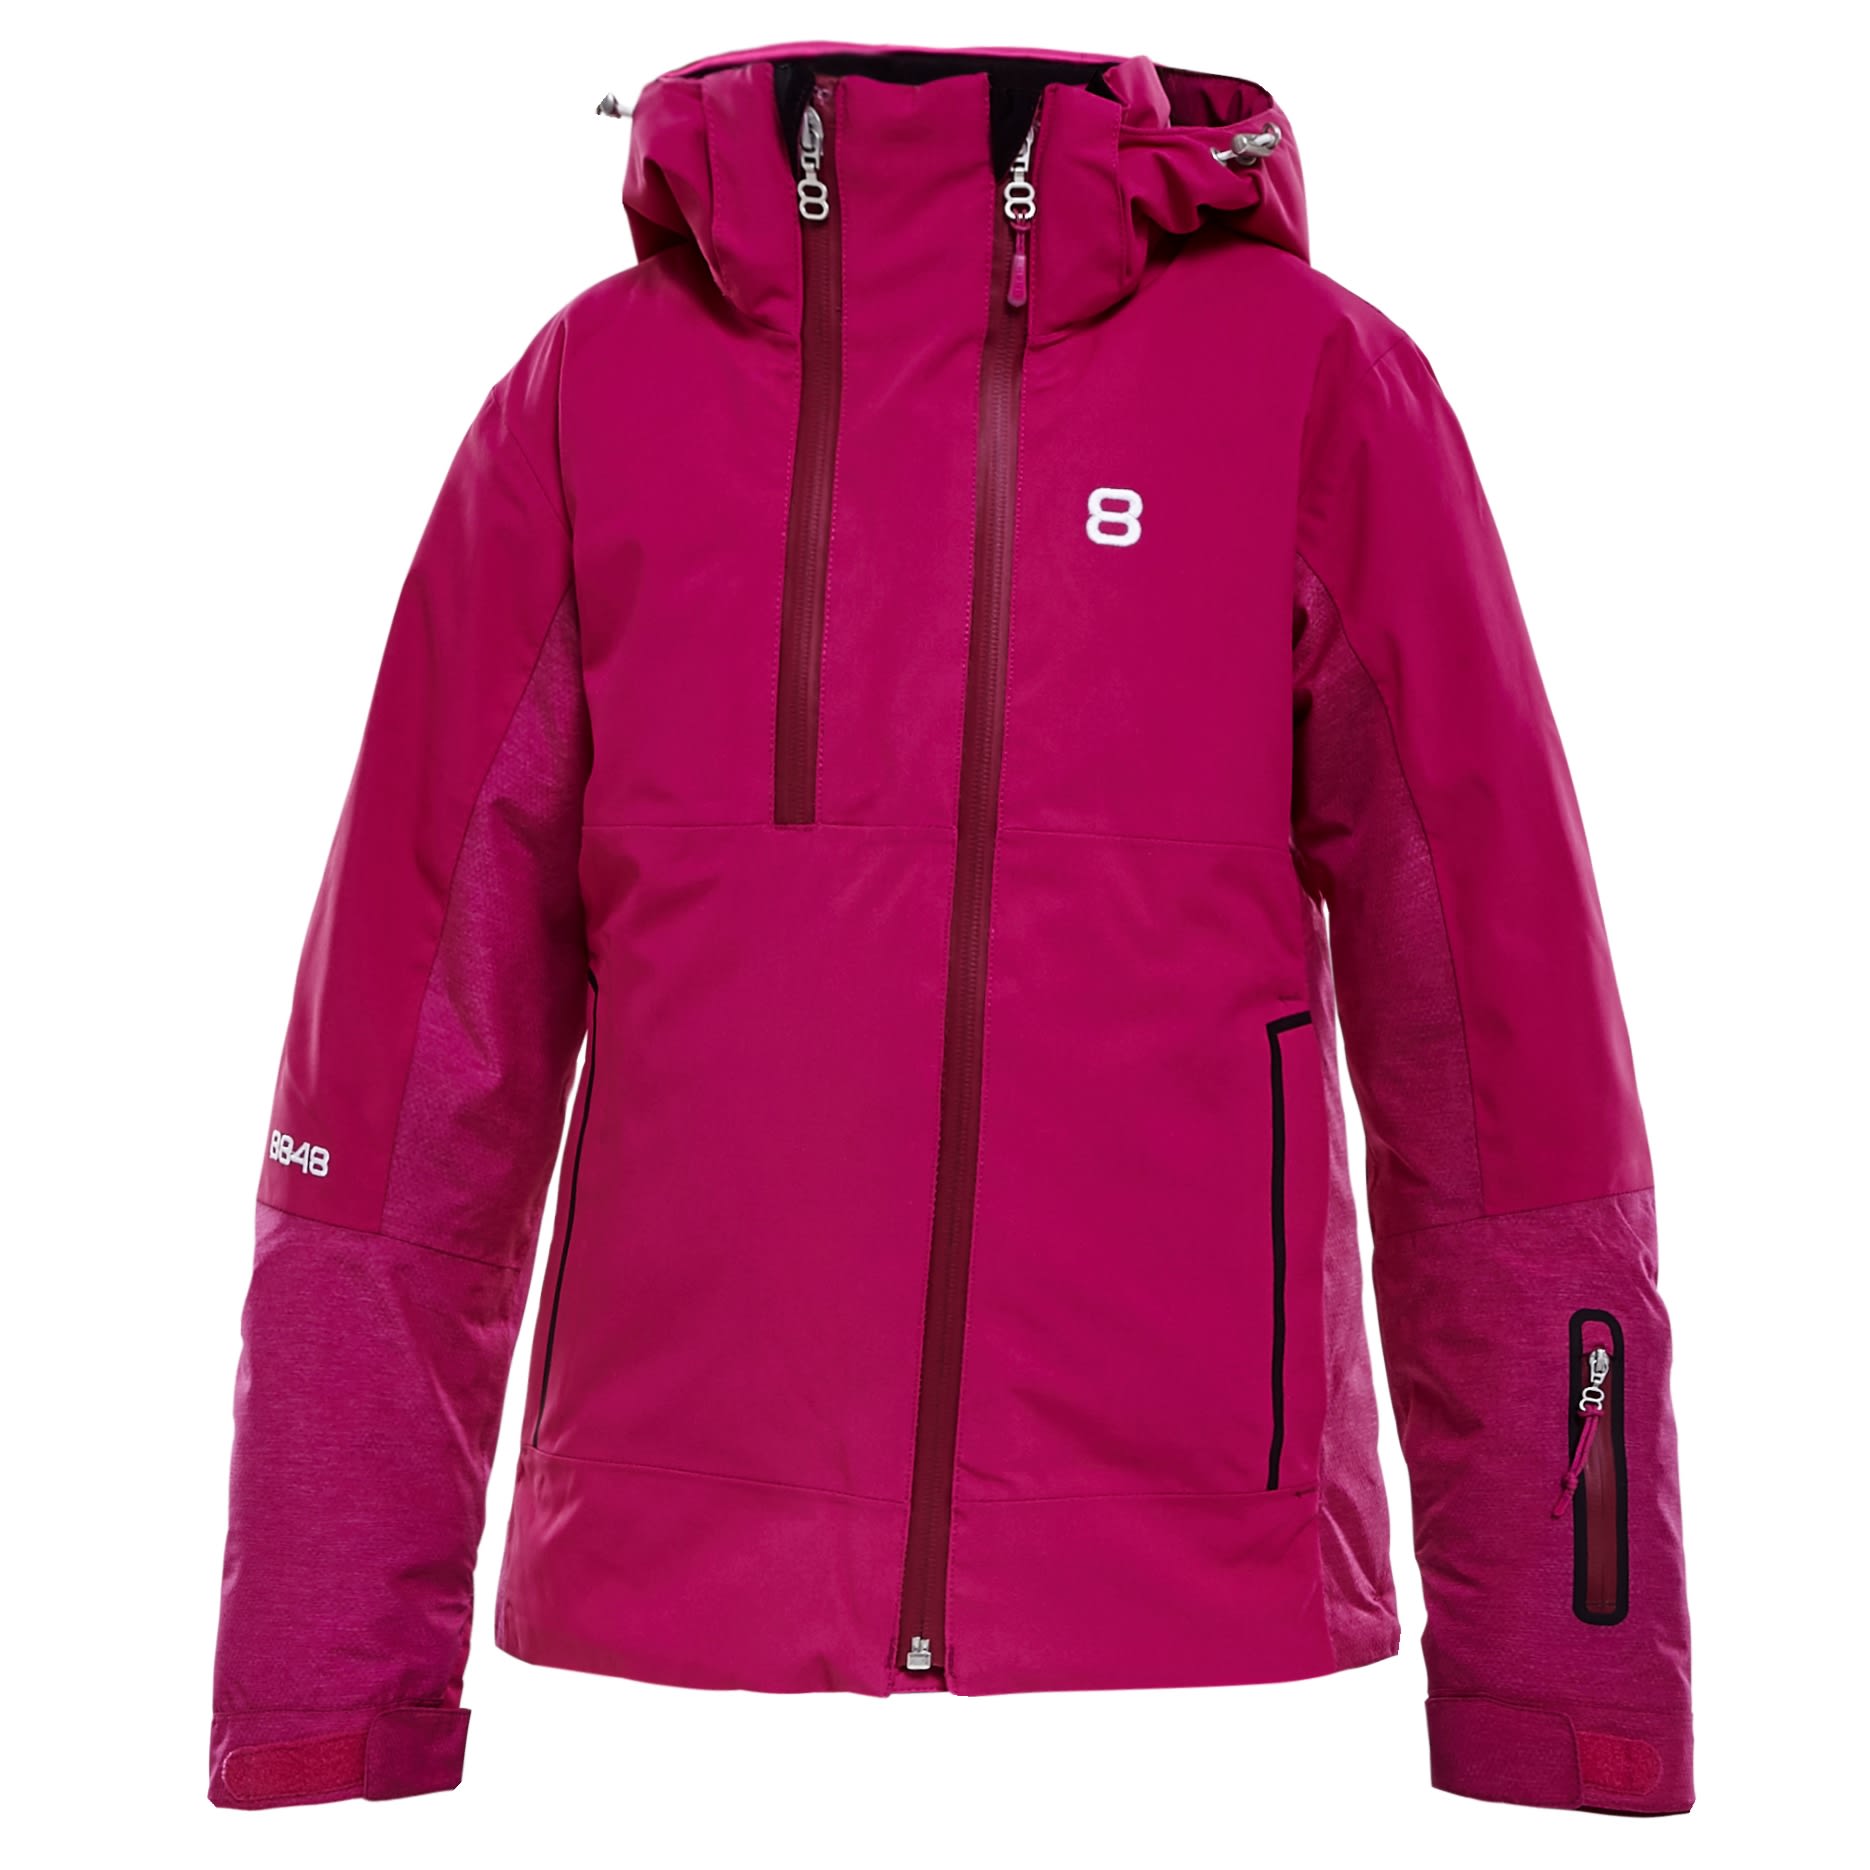 8848 Altitude Rebecca Jr Jacket from